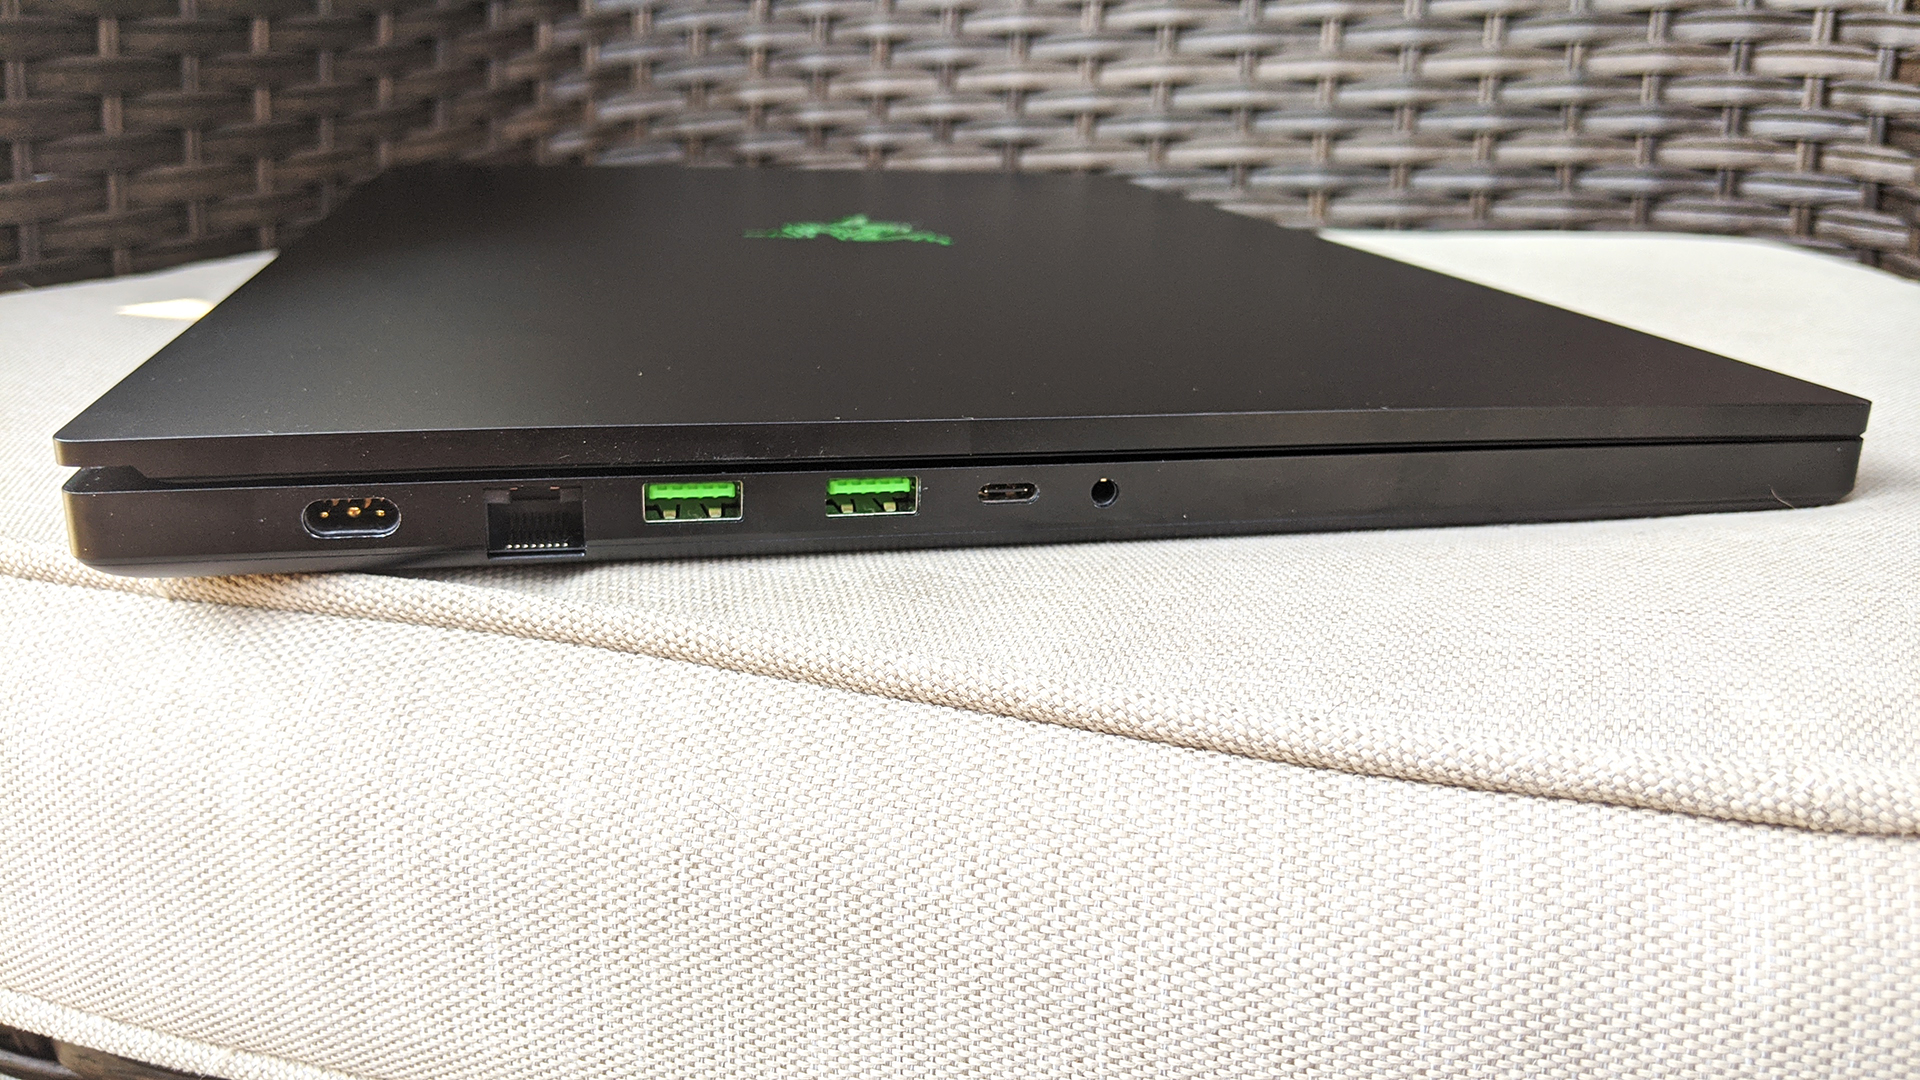 Just as welcome is an ethernet port! There's also a charging port because this thing requires a lot of power. USB-C wouldn't suffice. (Photo: Joanna Nelius/Gizmodo)